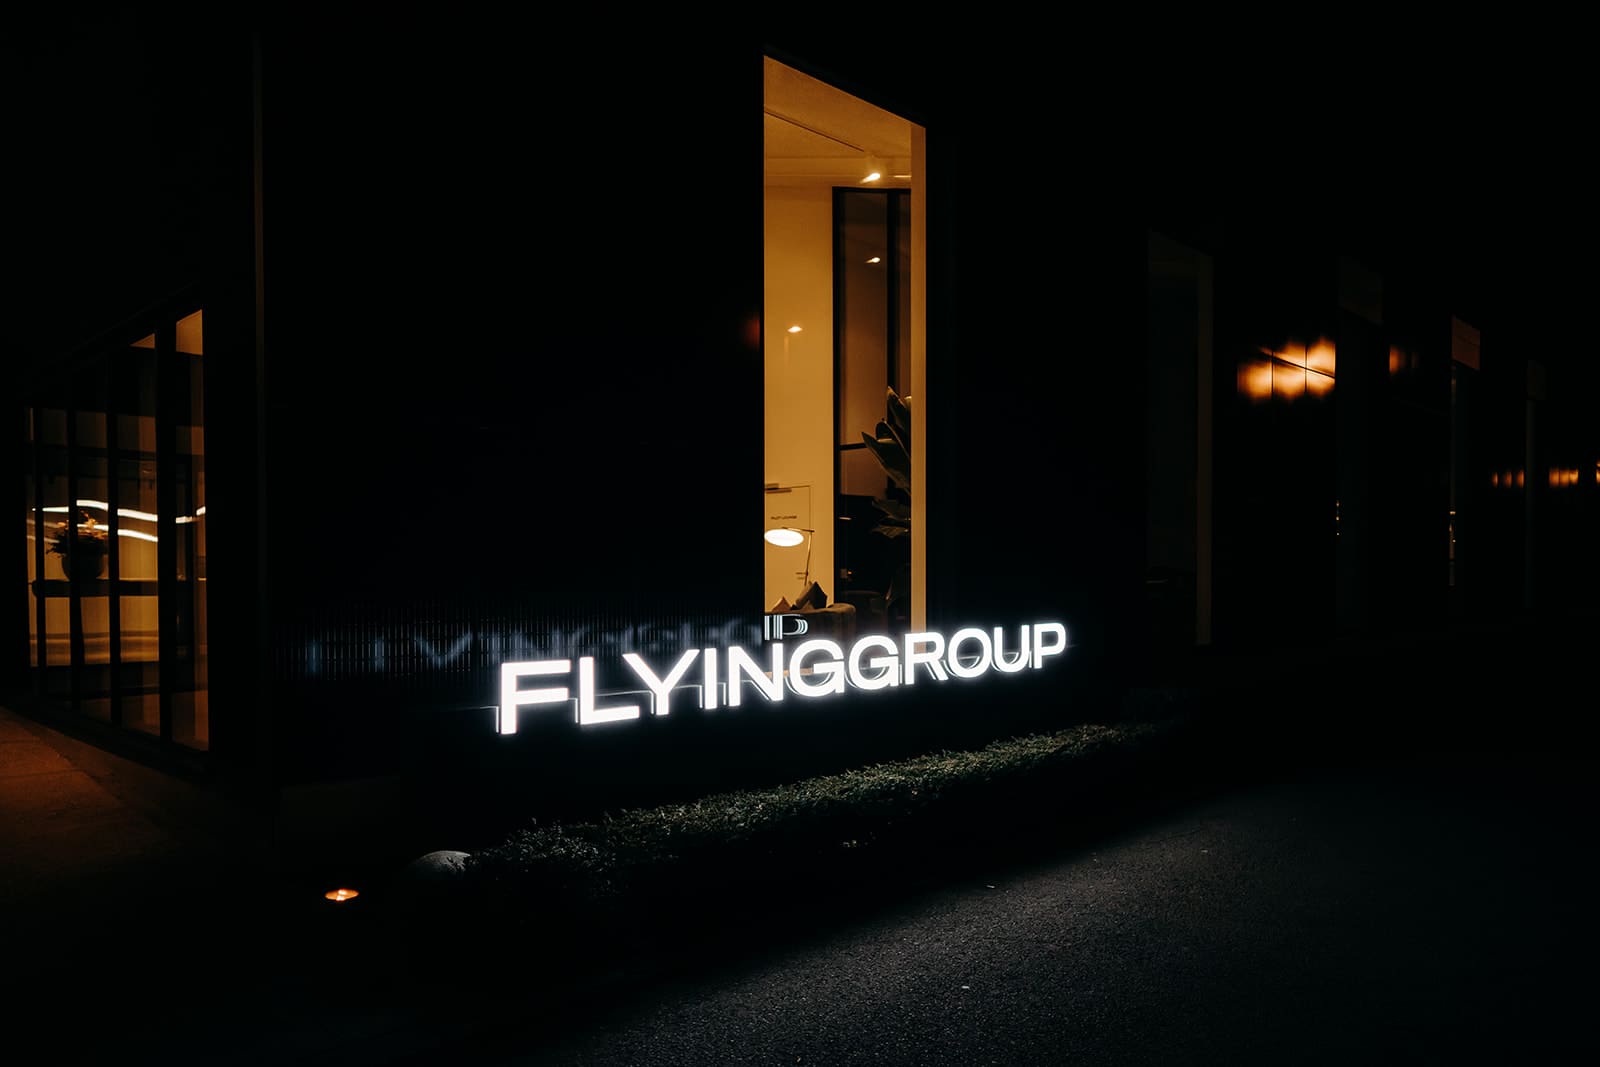 Flying group